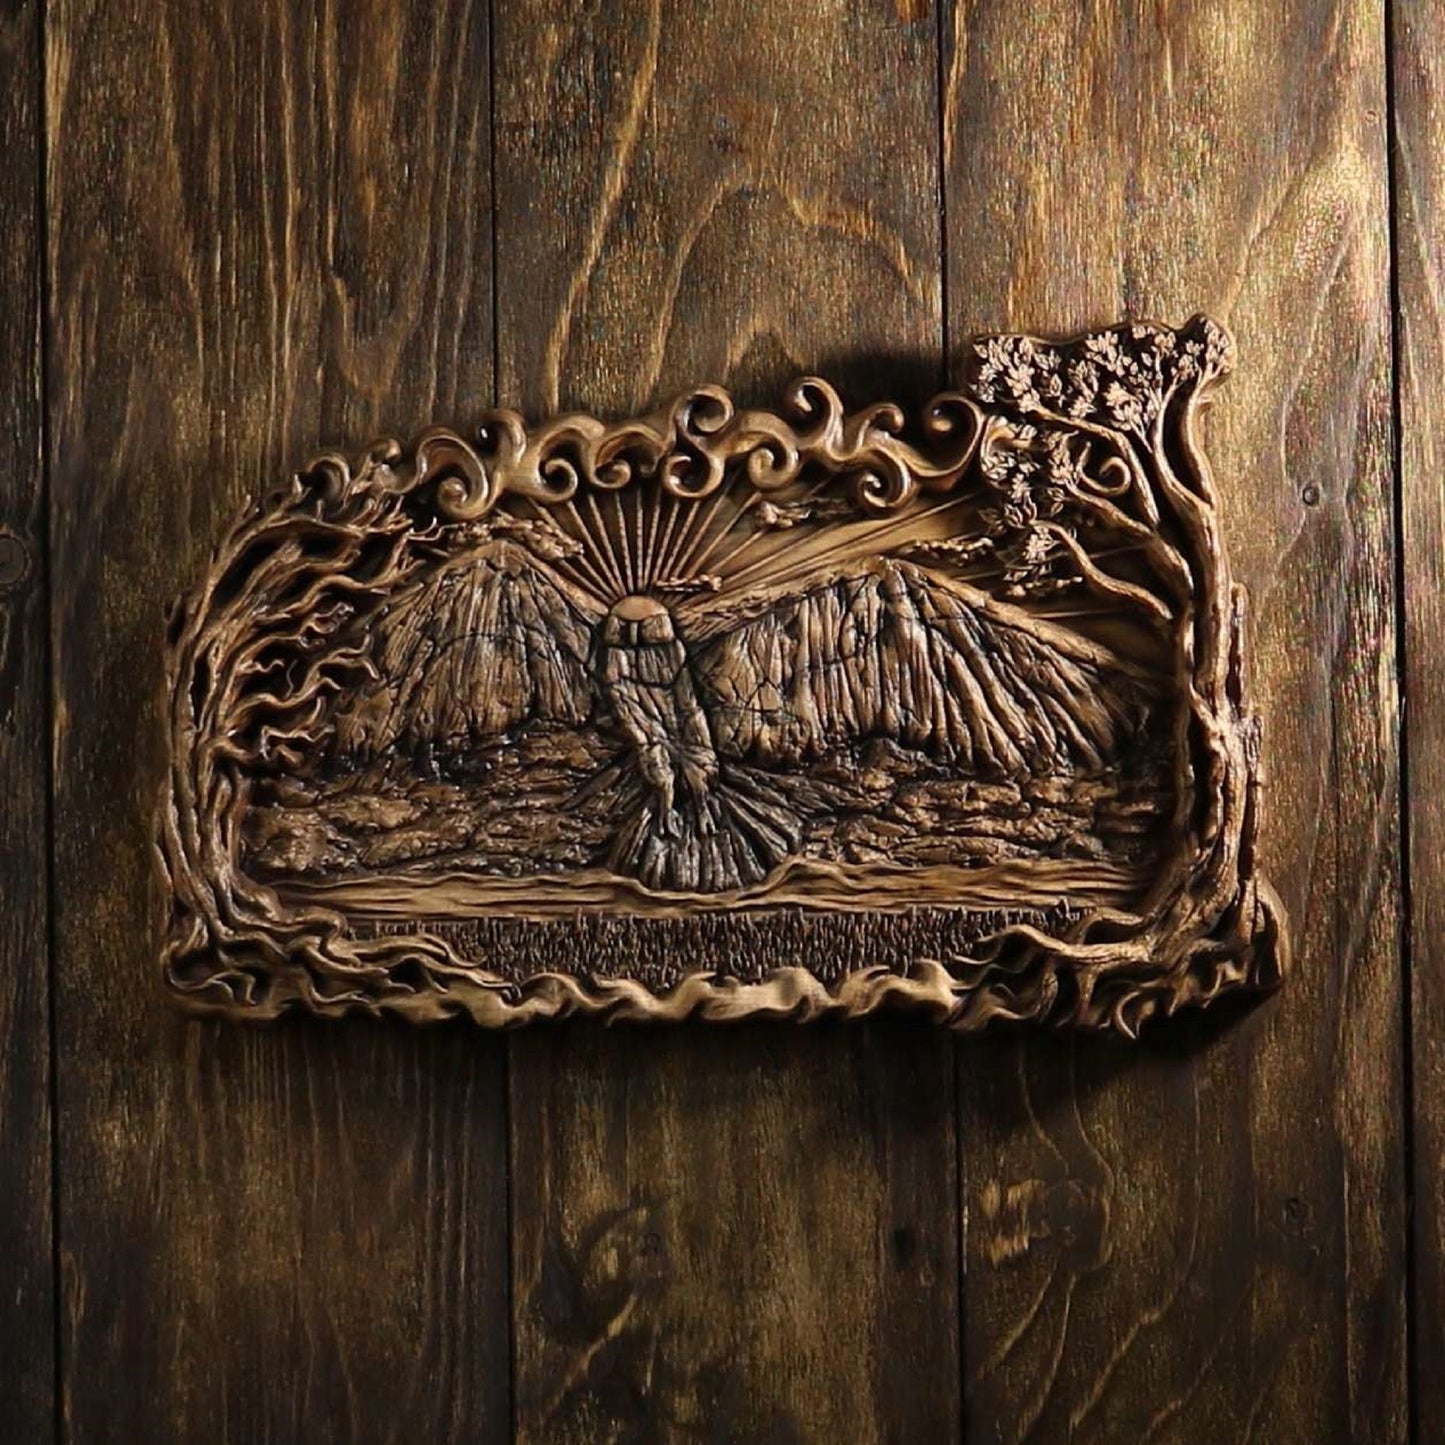 Raven art, Carved wood panel, Wood carving picture, Wood carving